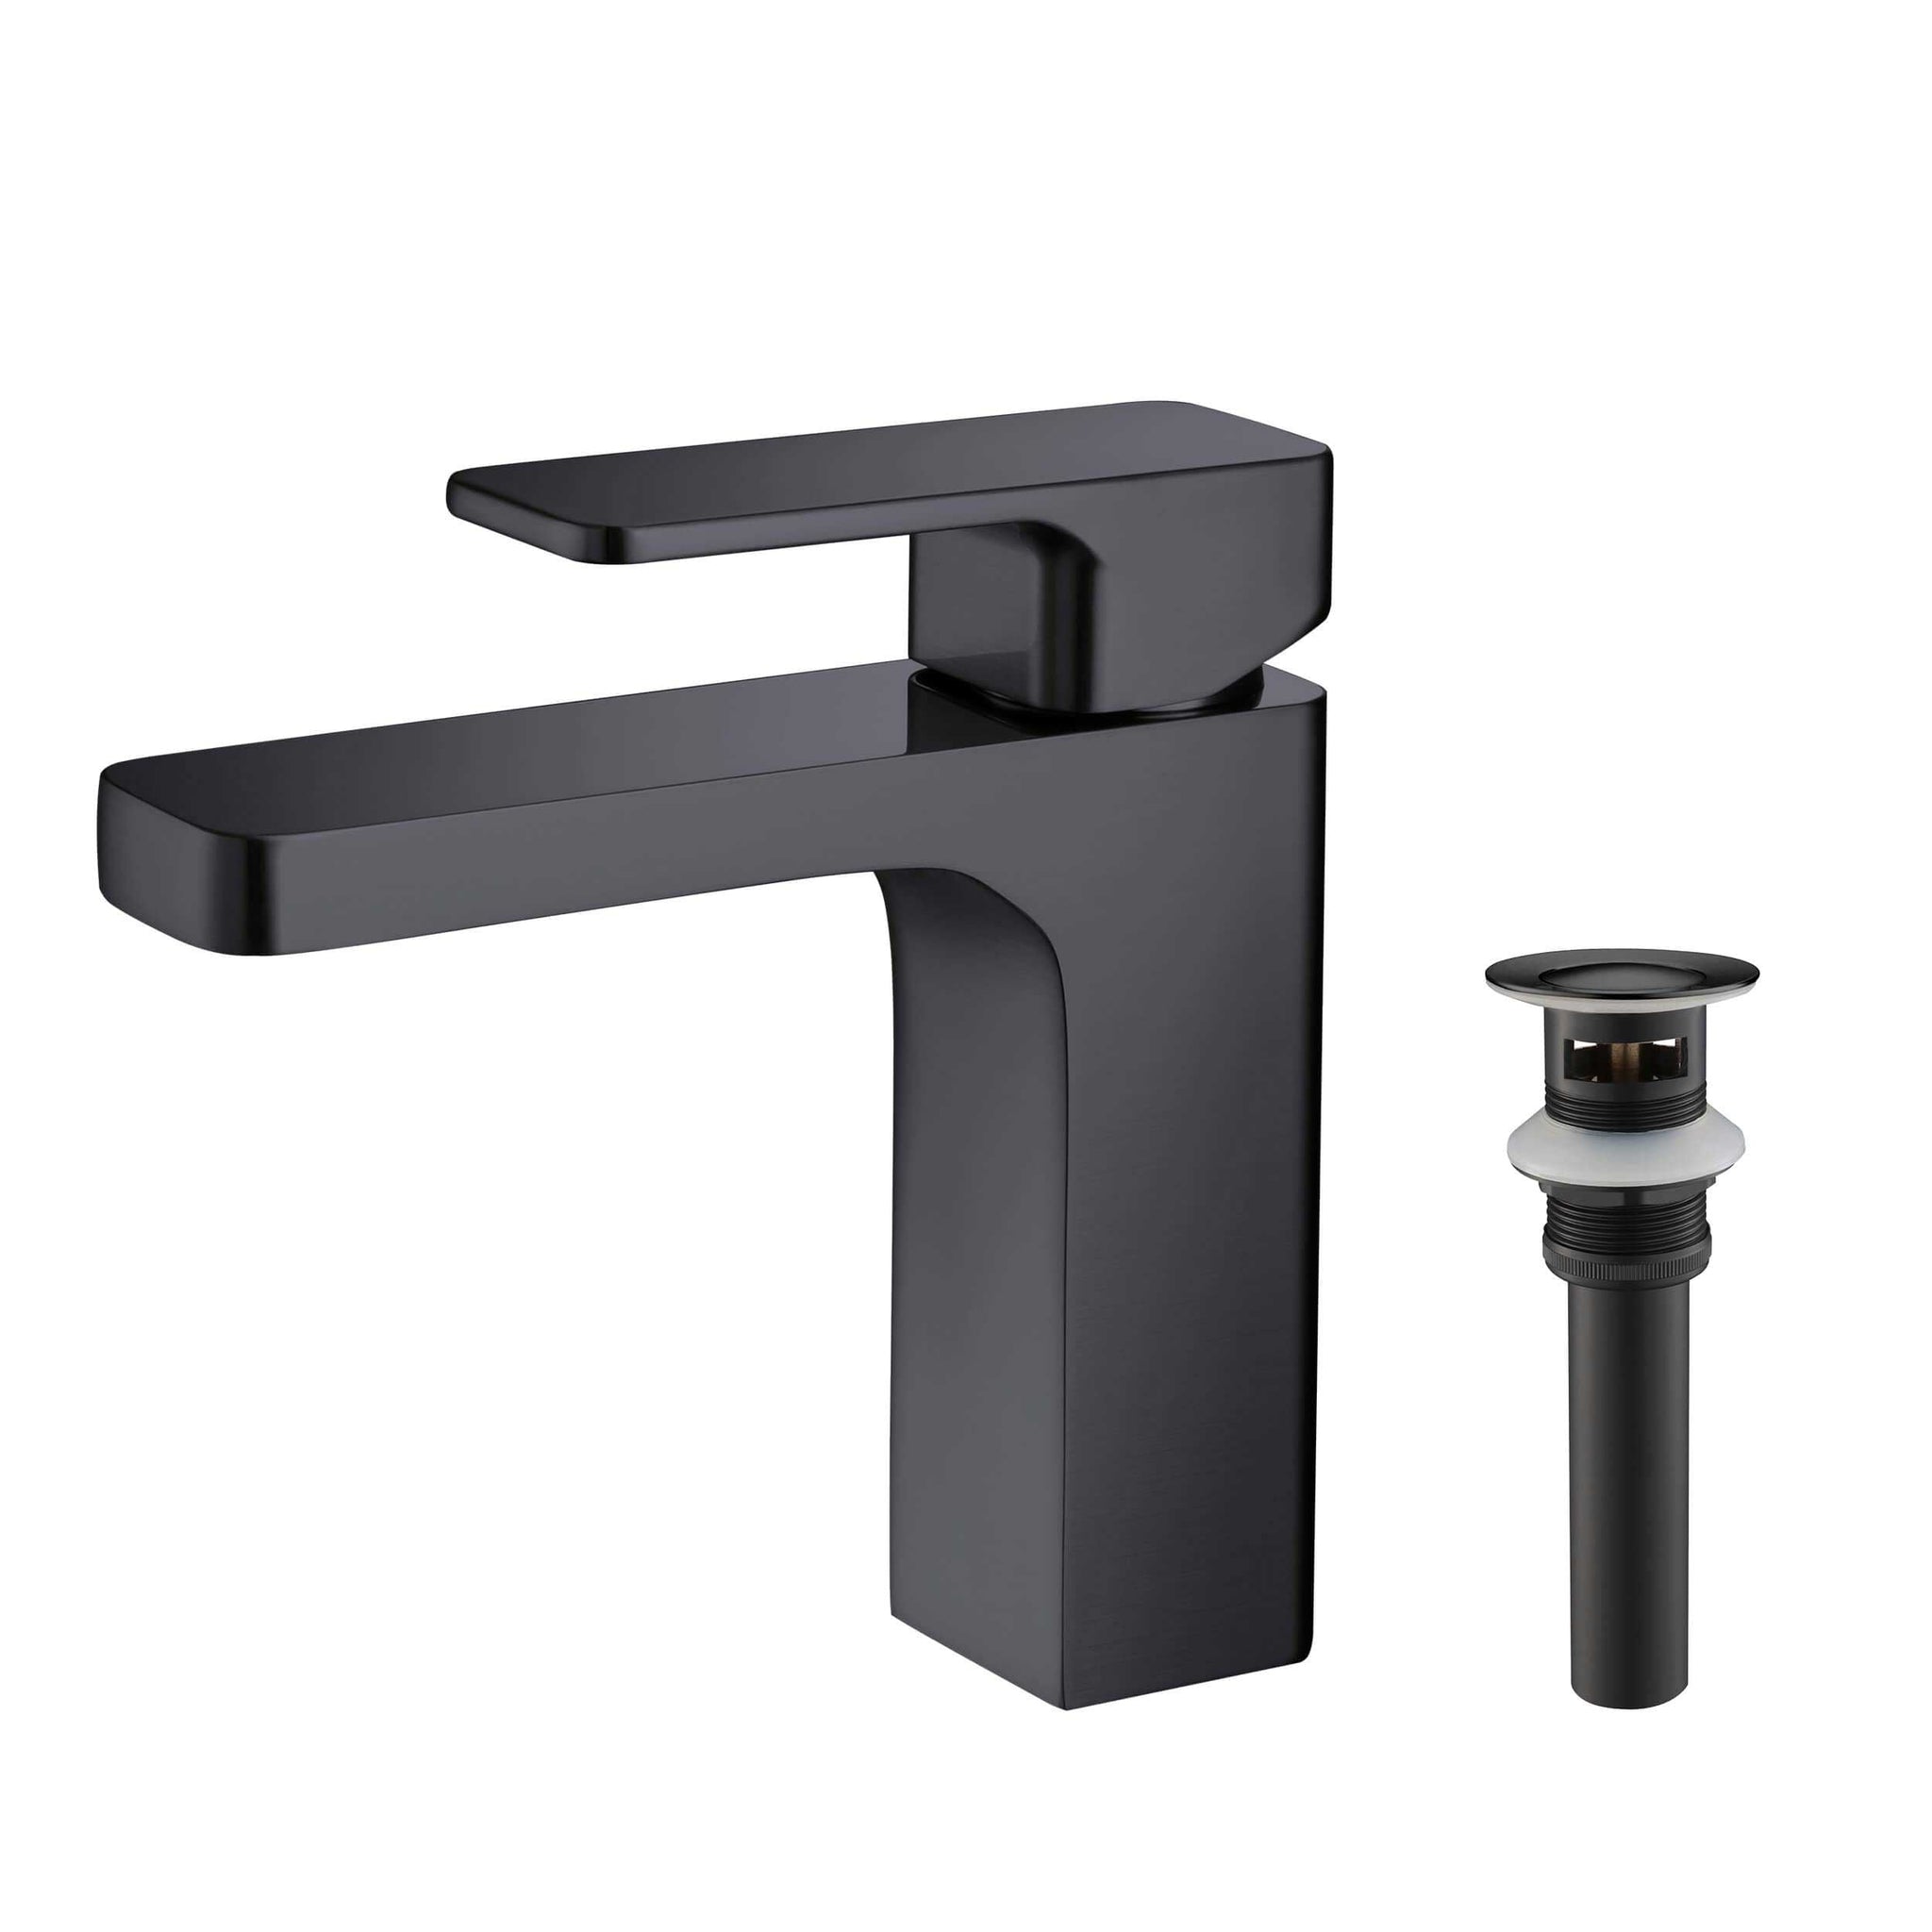 KIBI, KIBI Blaze Single Handle Matte Black Solid Brass Bathroom Sink Faucet With Pop-Up Drain Stopper Small Cover With Overflow